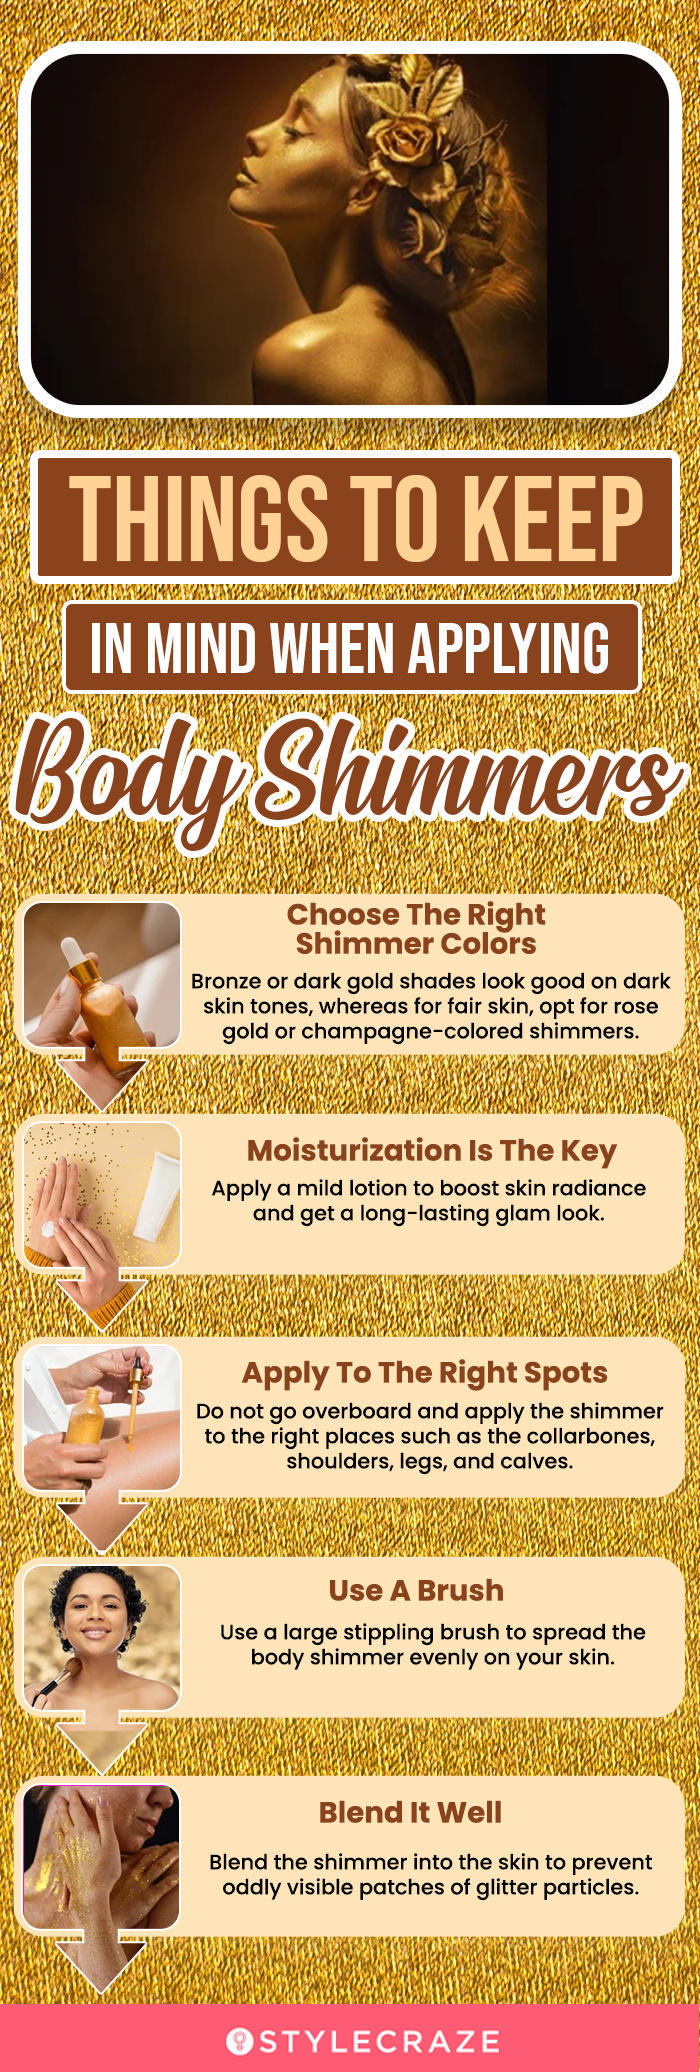 Things To Keep In Mind When Applying Body Shimmer (infographic)